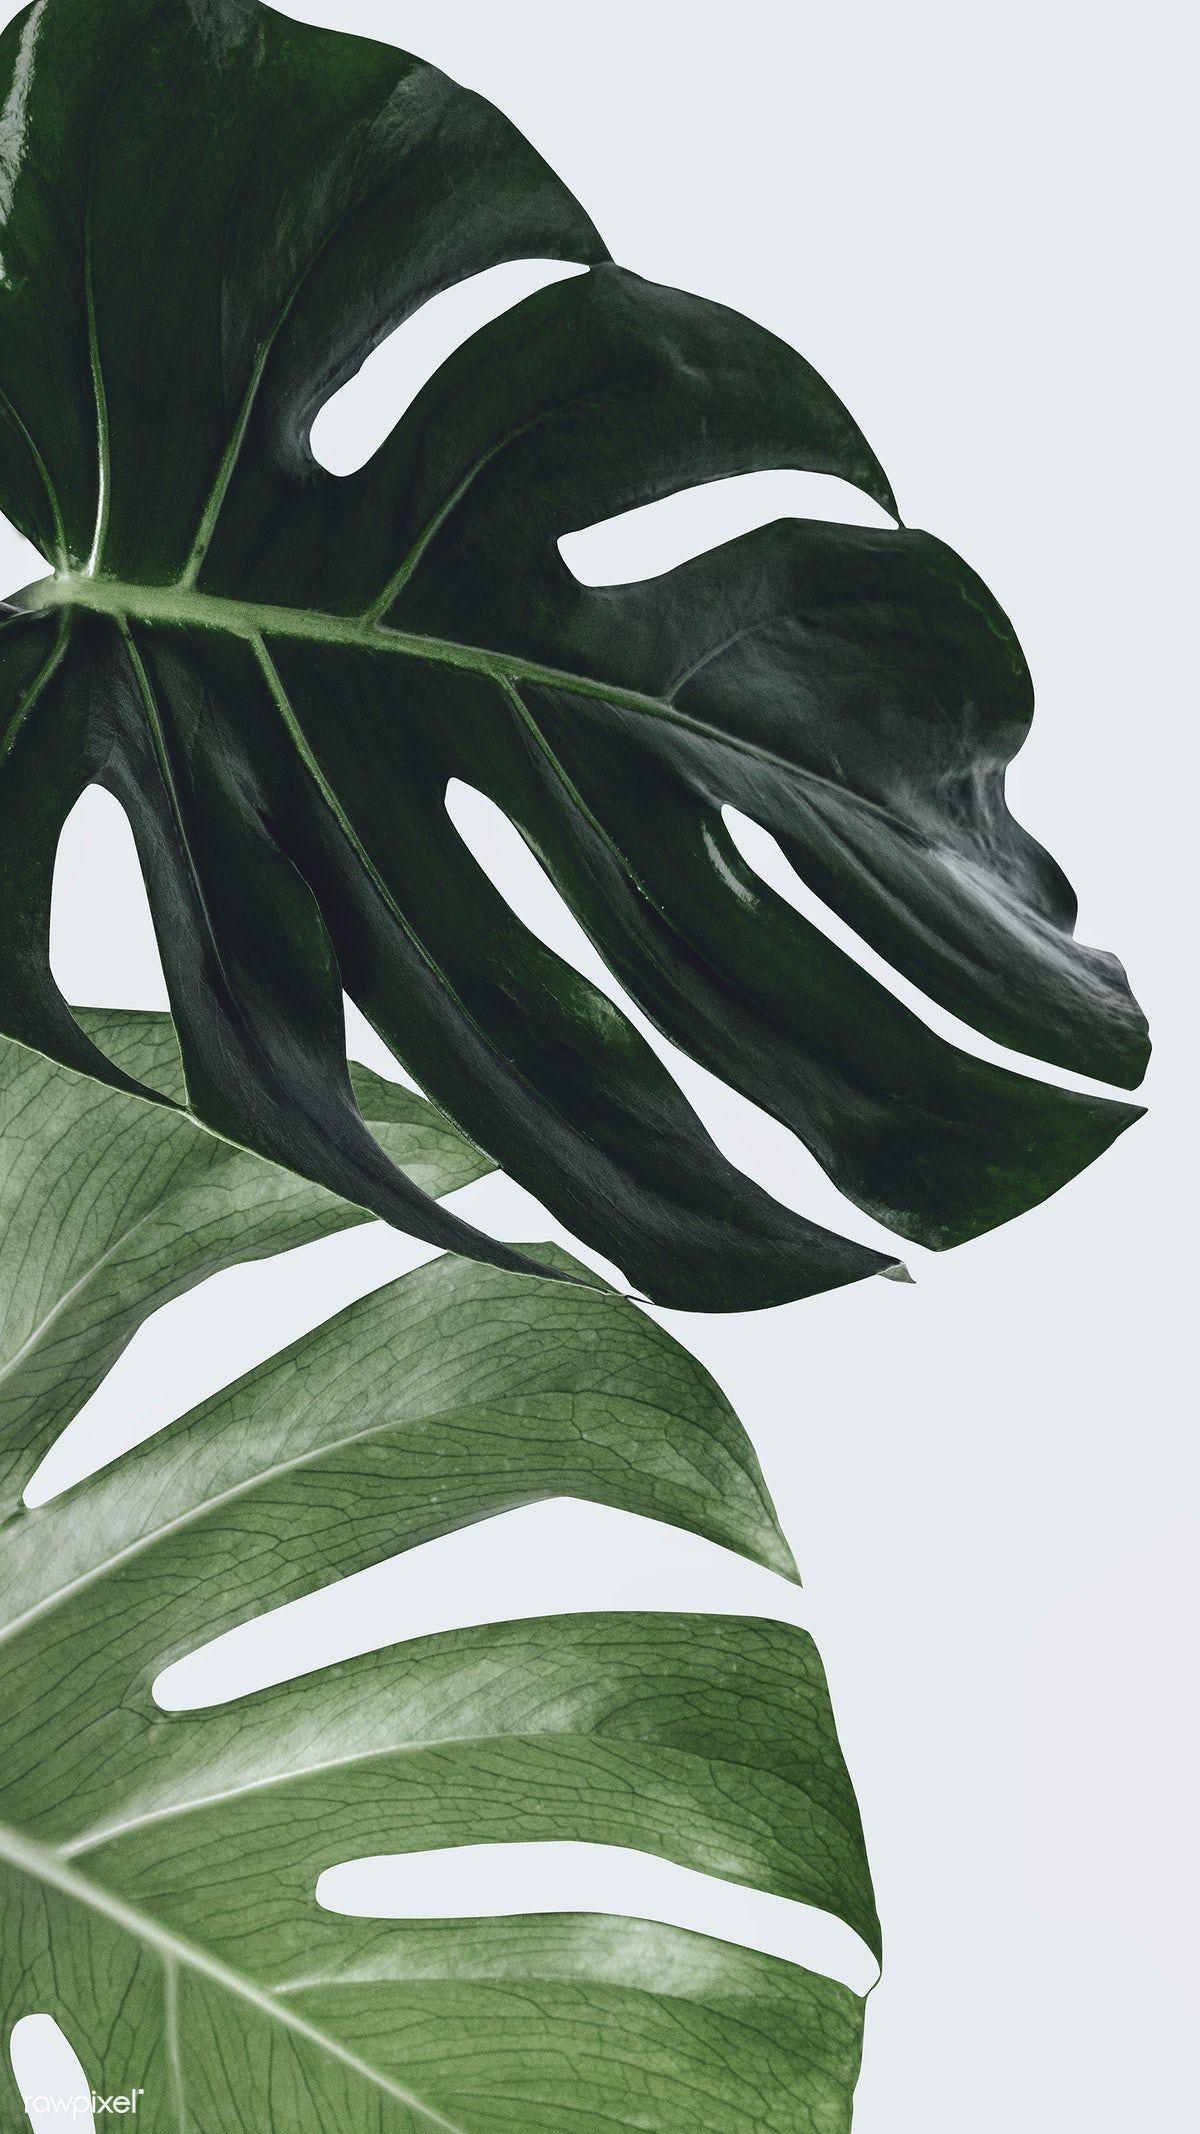 Green Leaves Of Monstera Plant Growing At Home Wallpaper Interior Leaf   Wallpaperforu